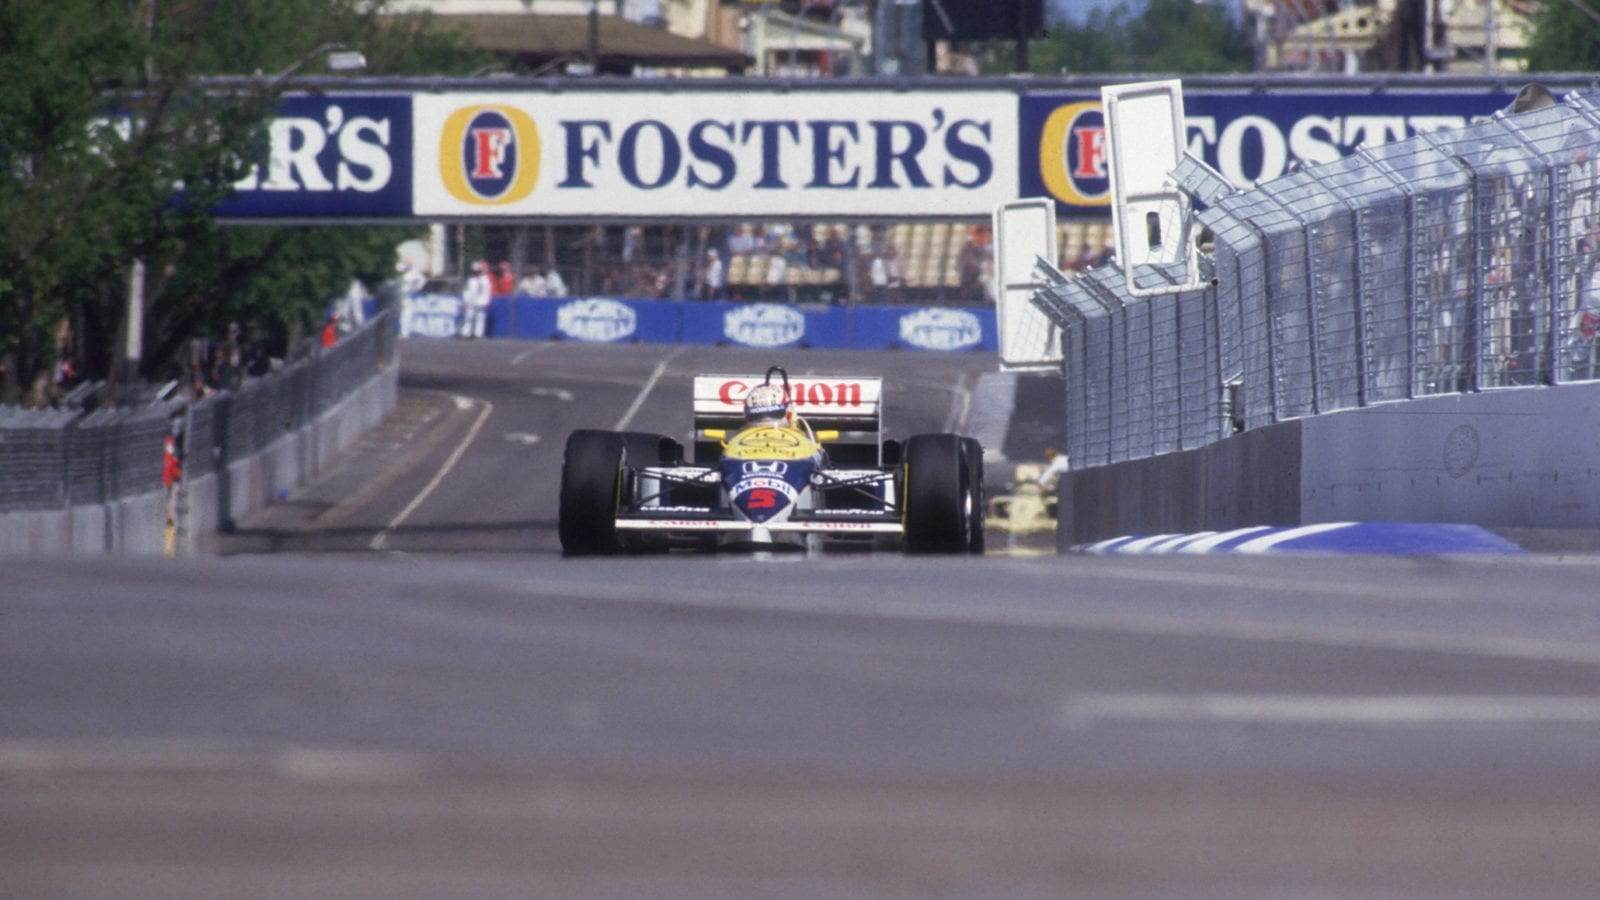 Nigel Mansell's Williams during the 1986 F1 Australian Grand Prix in Adelaide